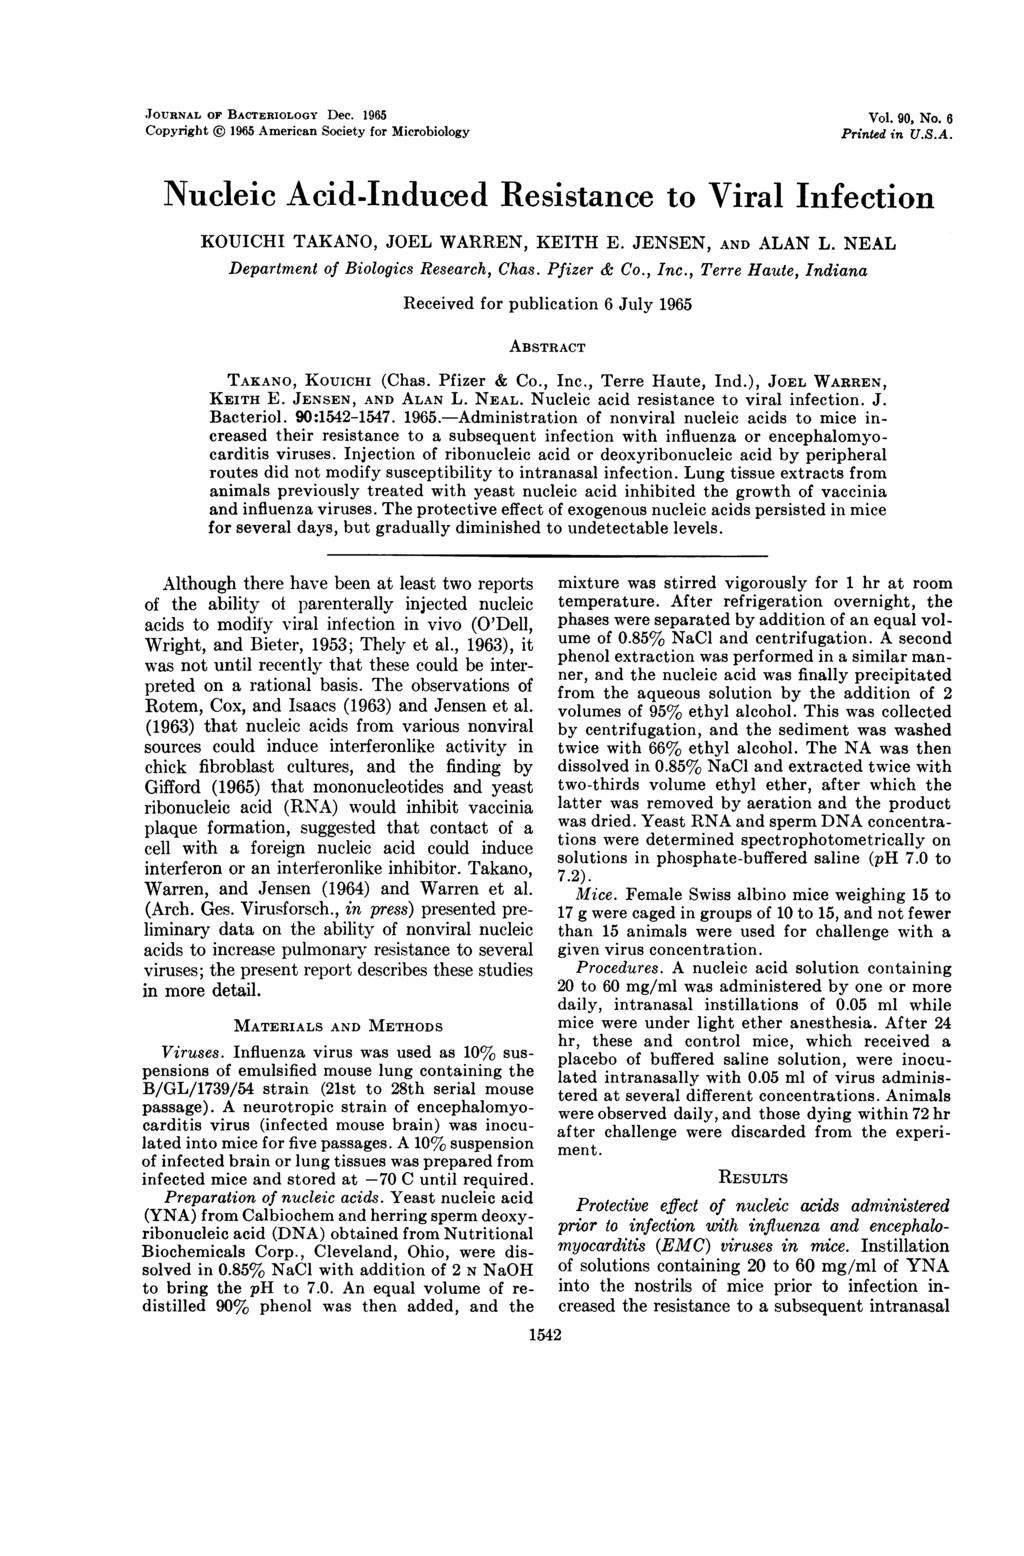 JOURNAL OF BACTERIOLOGY Dec. 1965 Copyright 1965 American Society for Microbiology Vol. 9, No. 6 Printed in U.S.A. Nucleic Acid-Induced Resistance to Viral Infection KOUICHI TAKANO, JOEL WARREN, KEITH E.